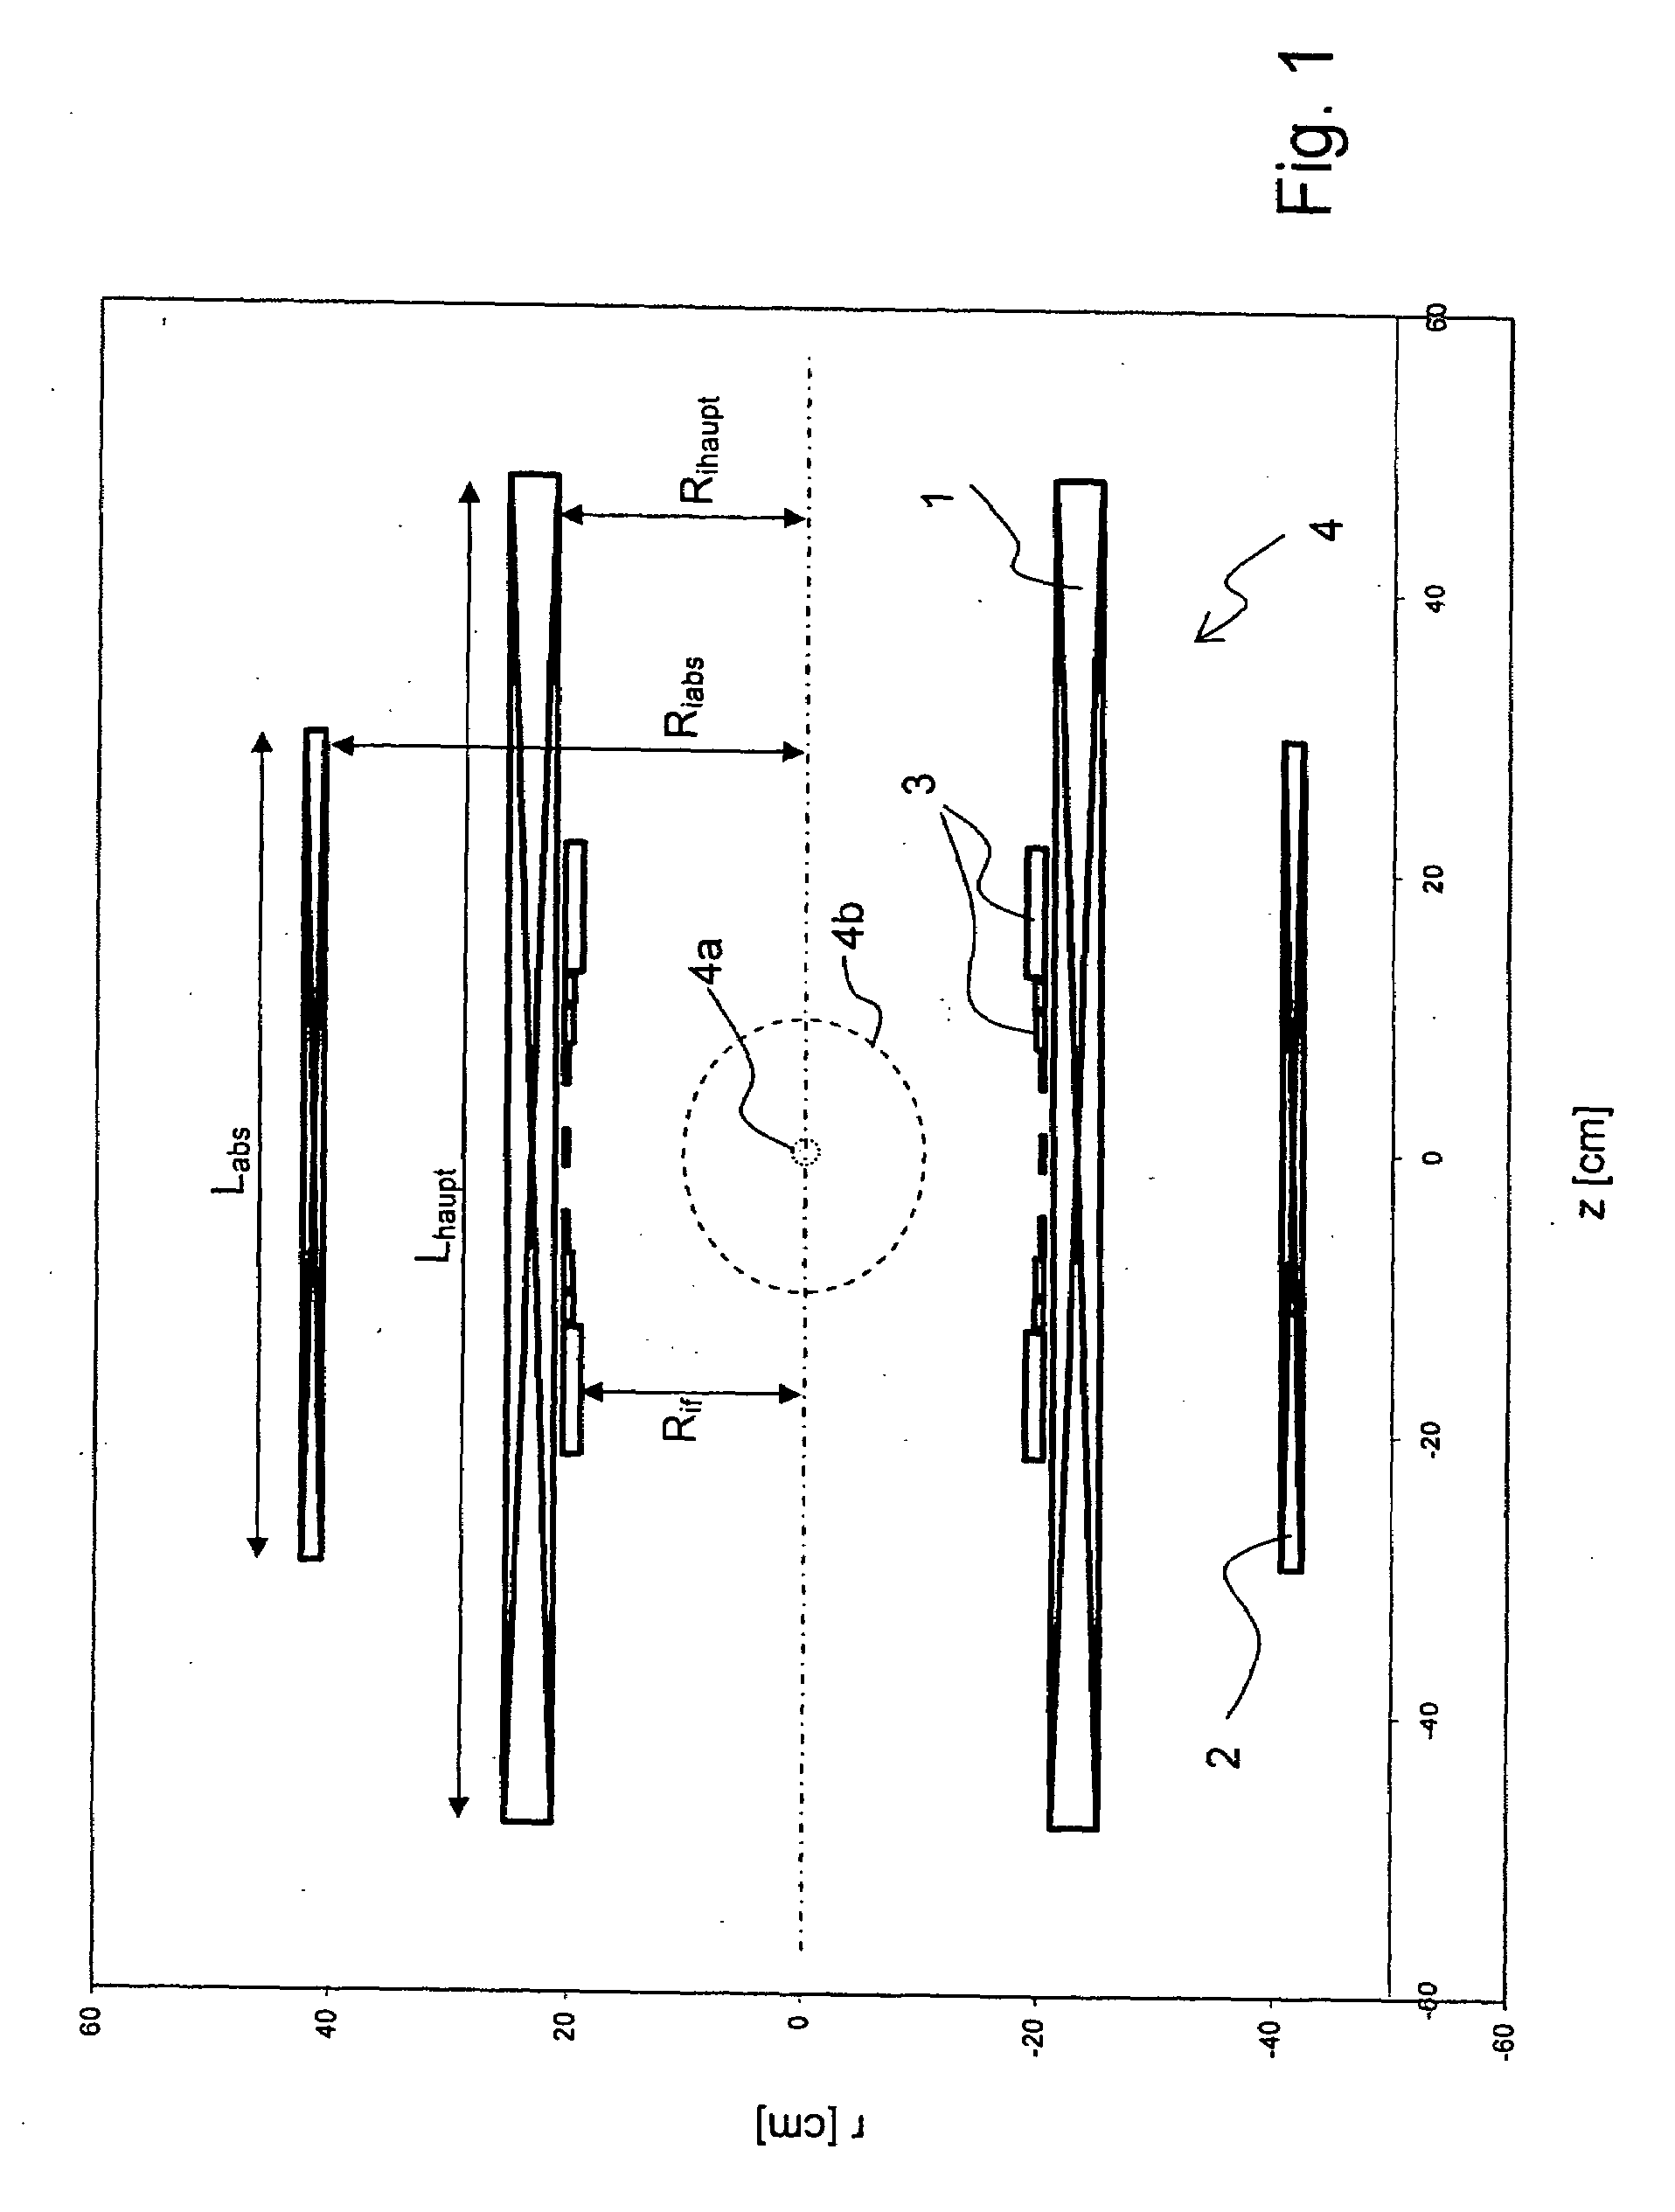 Compact superconducting magnet configuration with active shielding having a shielding coil contributing to field formation